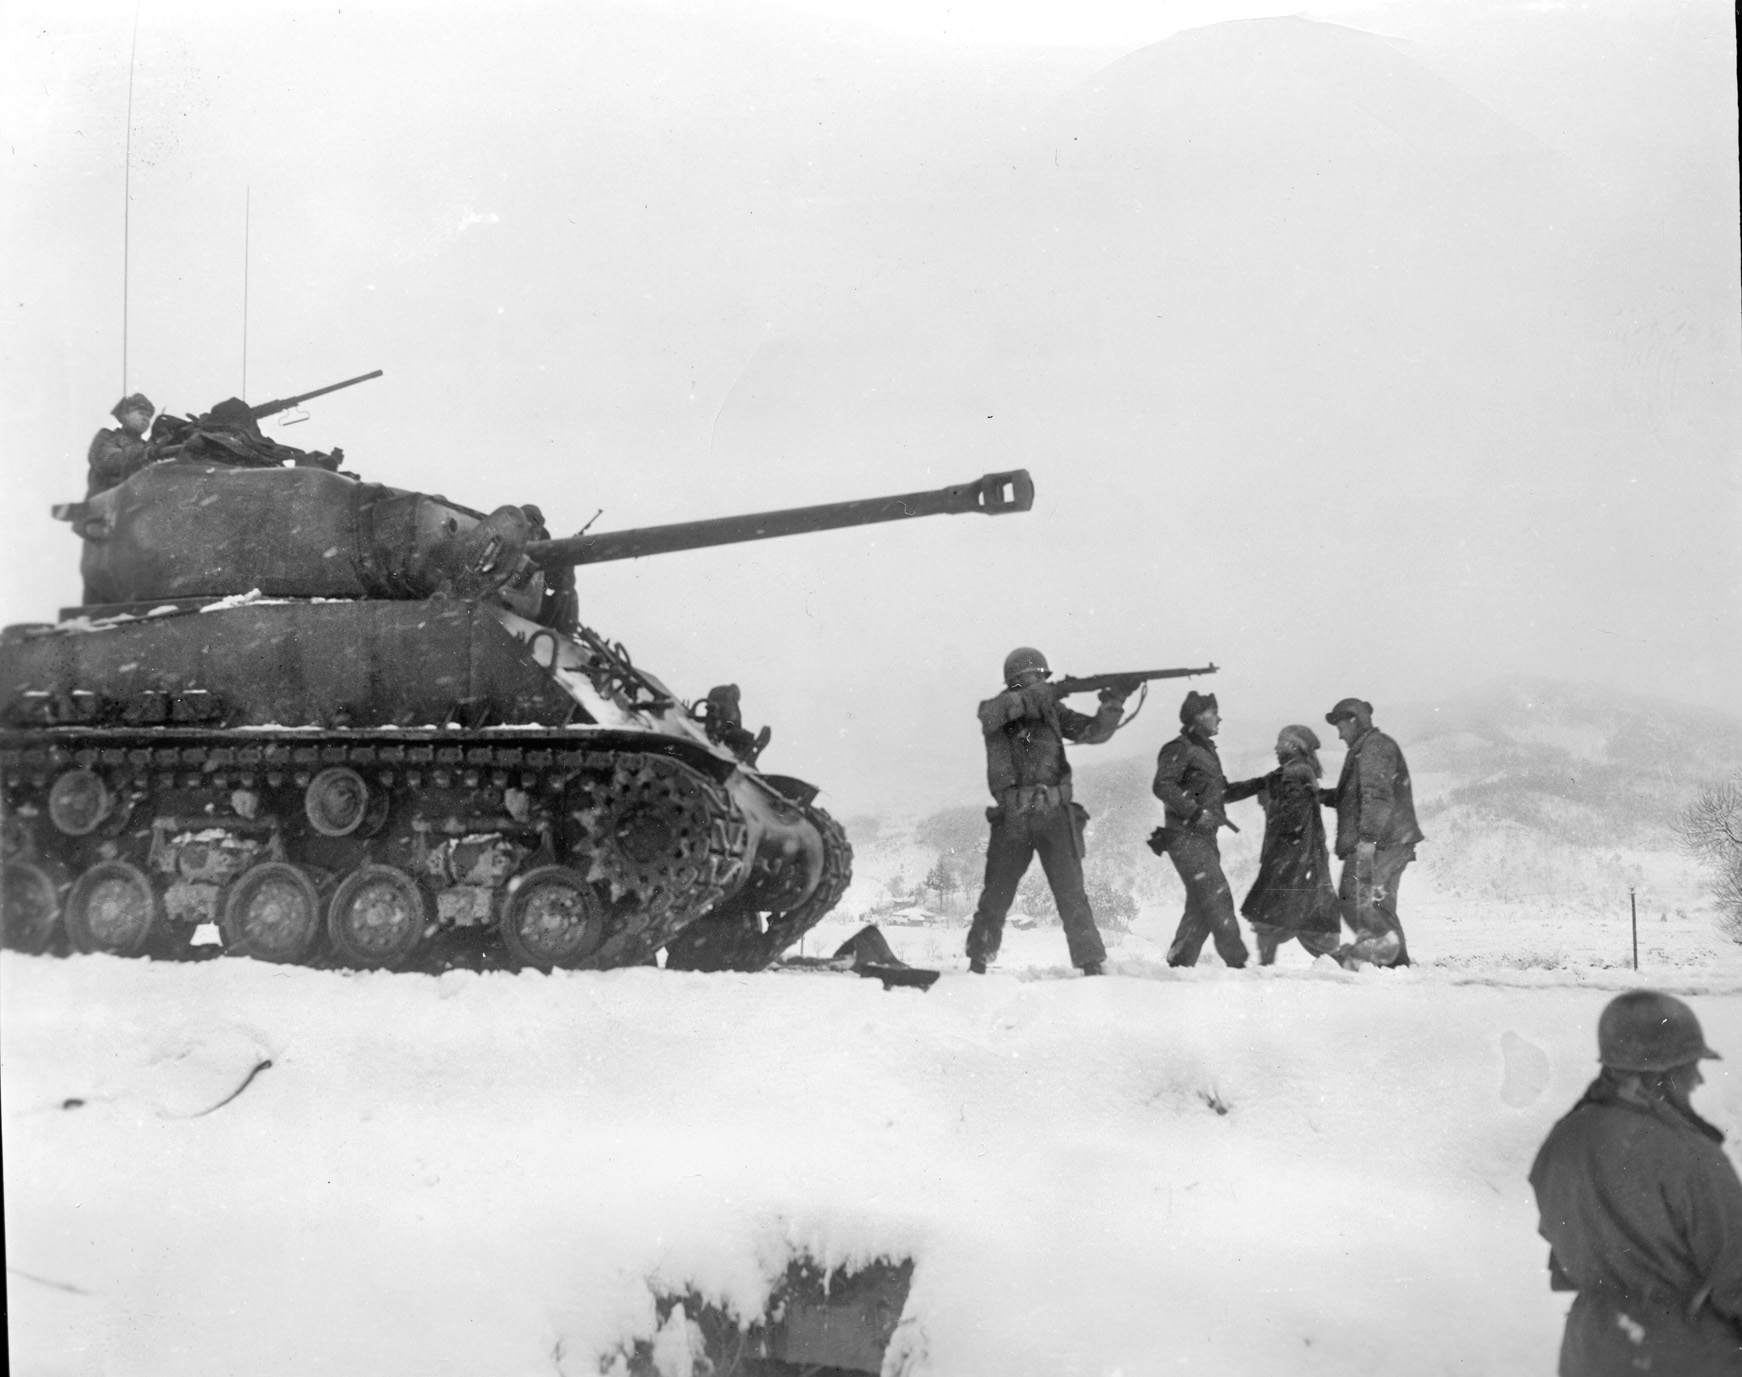 A tank of the Heavy Tank Company, 7th Infantry Division, engages the enemy at the Chosin Reservoir as infantrymen escort a prisoner to the rear.